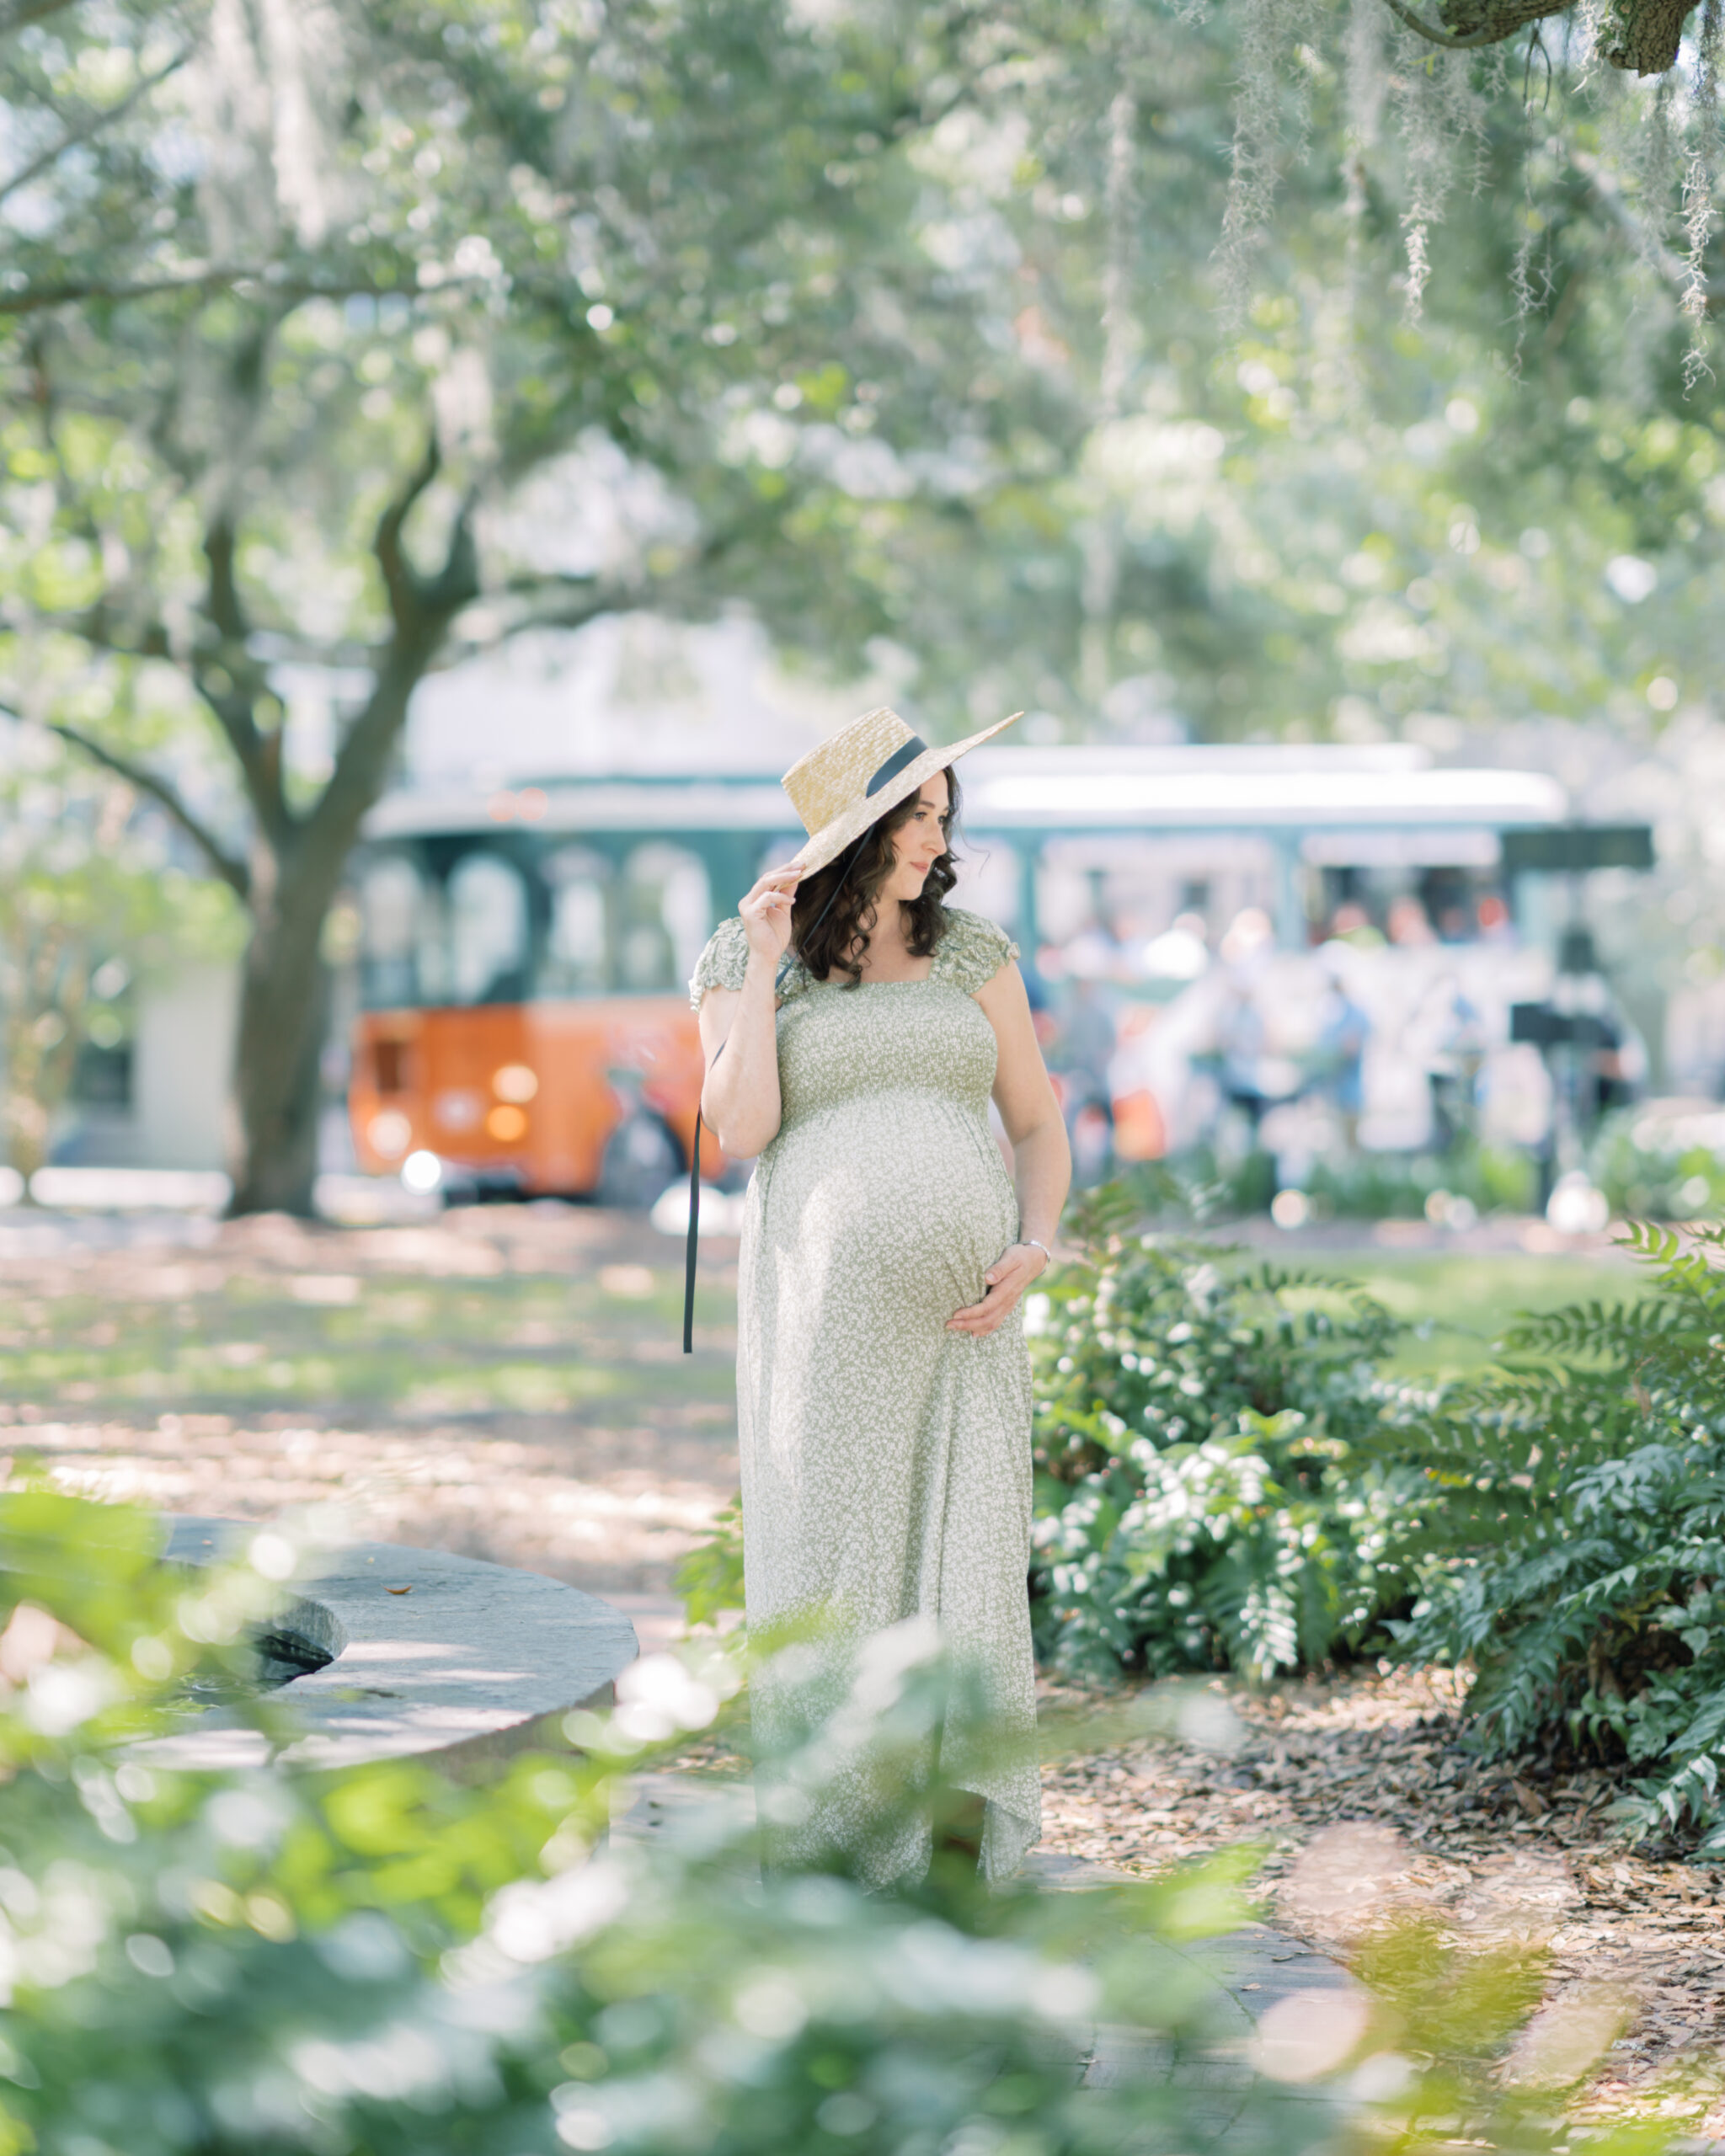 Mother hold hat down while standing in front of Savannah's iconic tour trolleys in Lafayette Square by Savannah Family Photographer Courtney Cronin